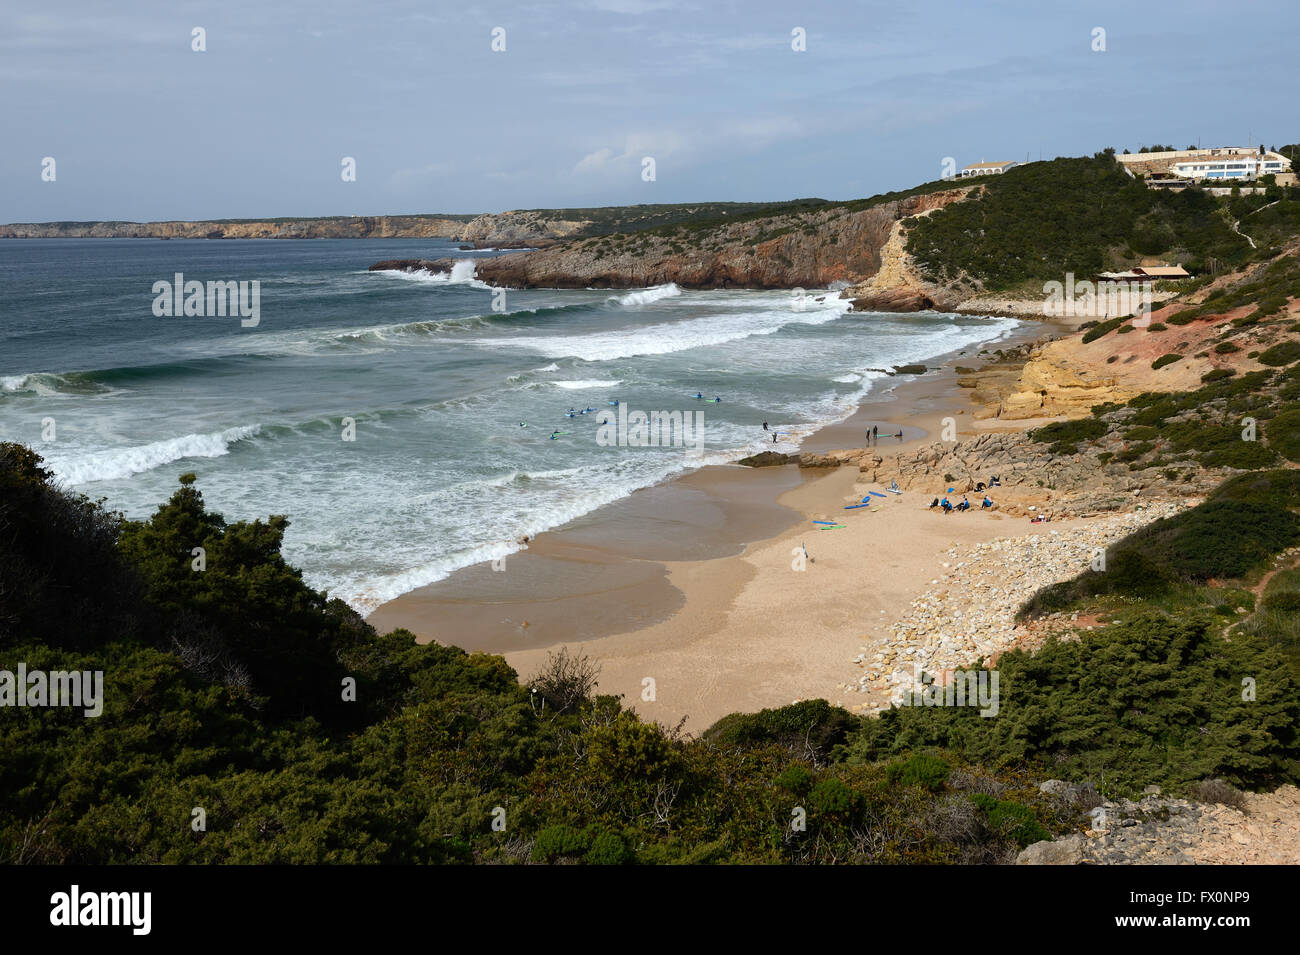 Atlantic surf rolls into a bay on the Algarve near Sagres in Portugal. A surf school practices in the shallows. Stock Photo